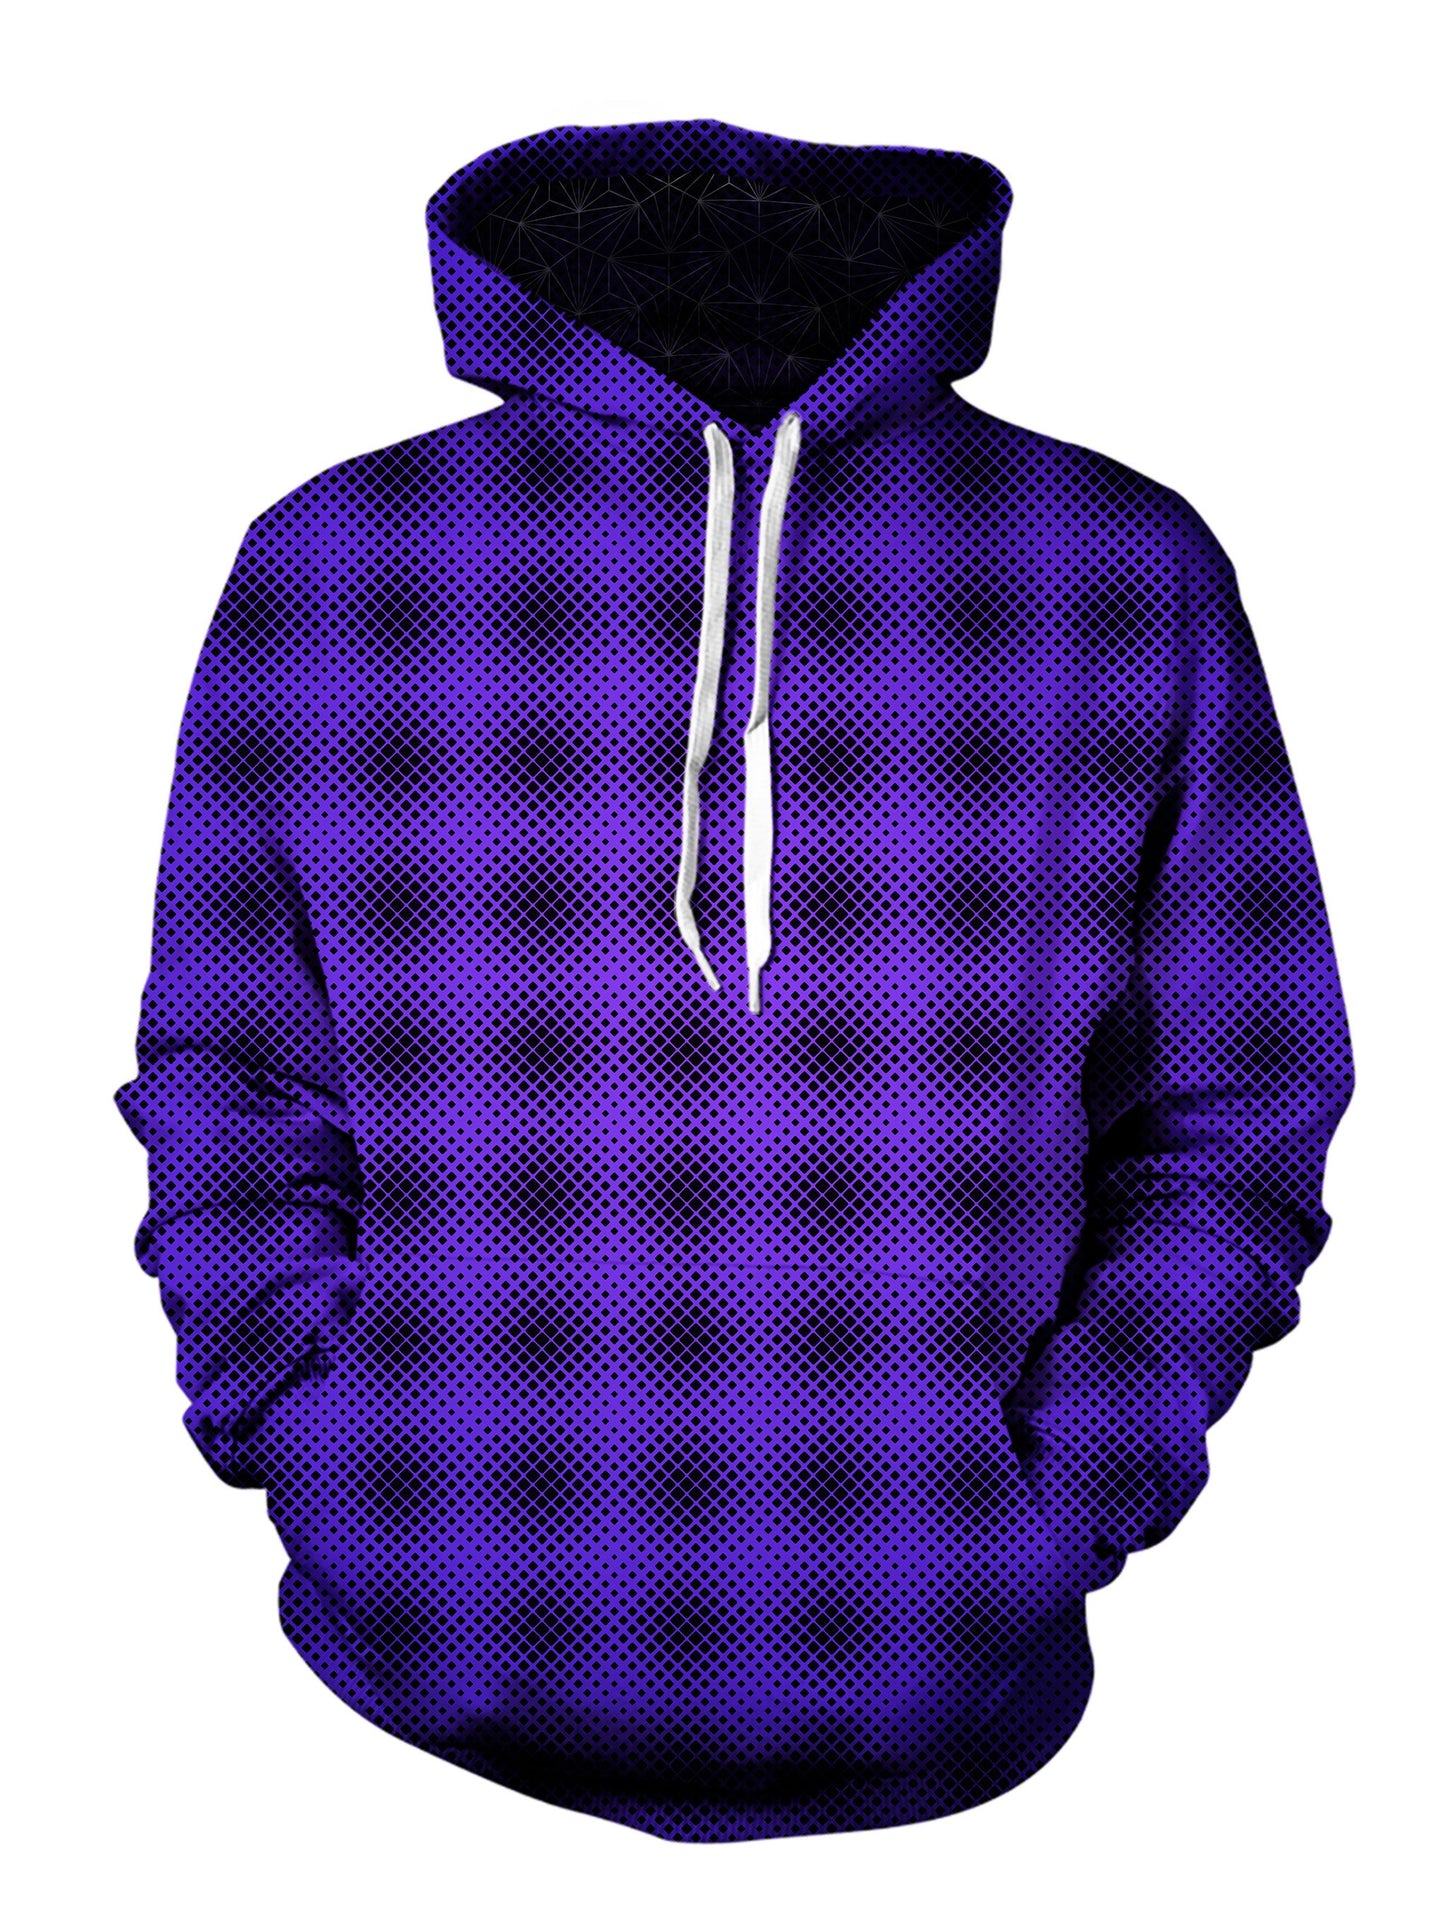 mens front view purple pattern hoodie - festival clothing